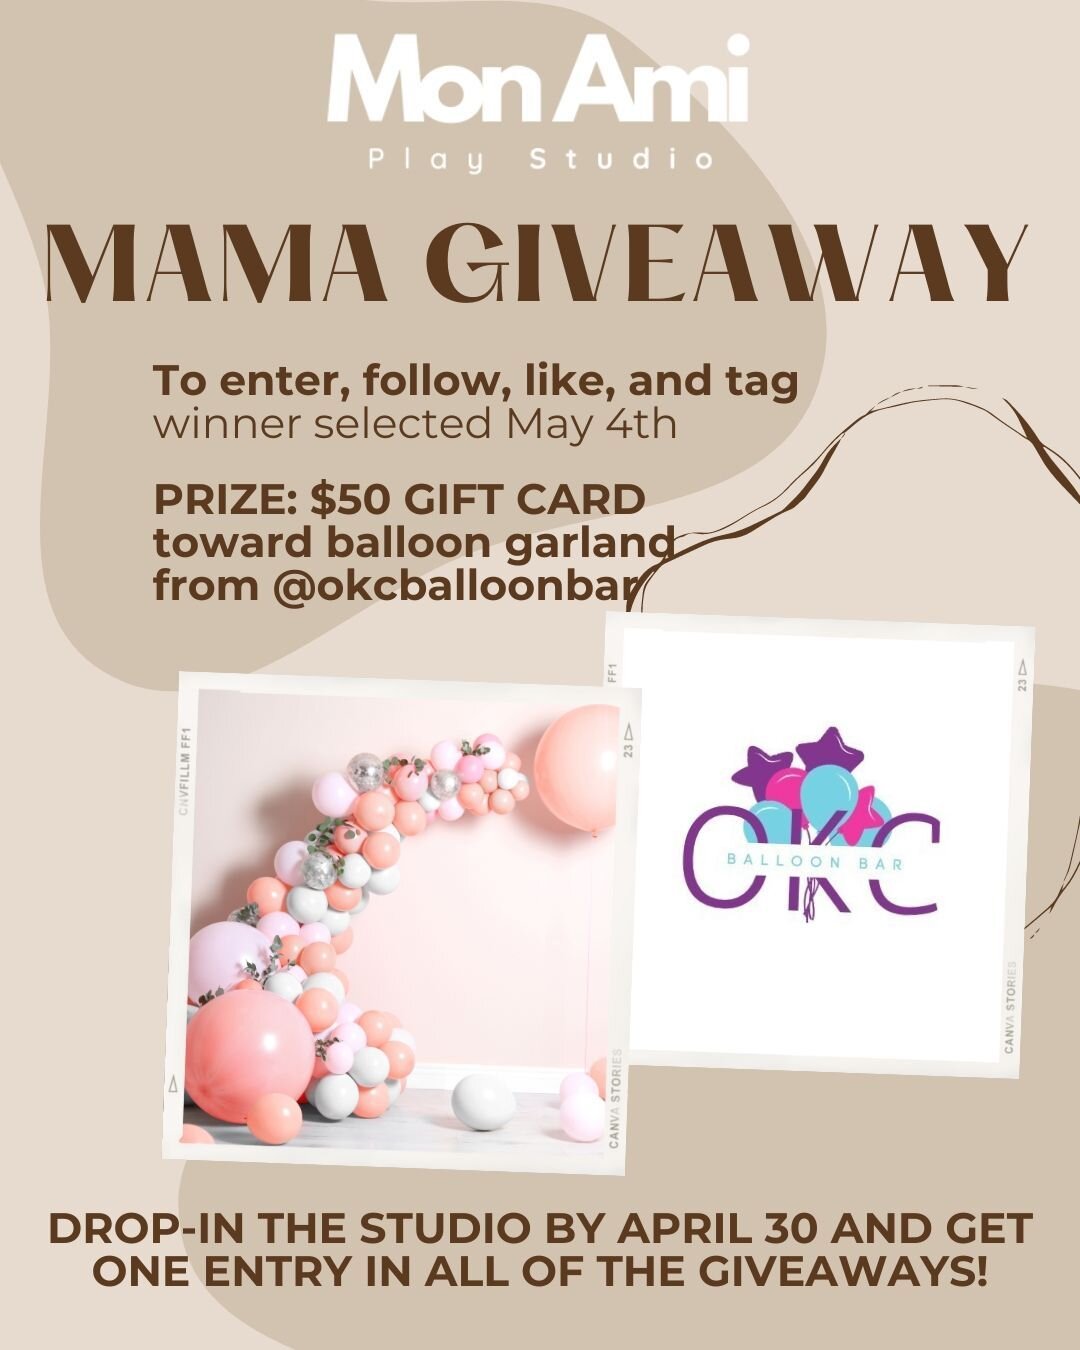 2024 MAMA GIVEAWAY DETAILS: 
Have a birthday or event coming up and want a gorgeous balloon garland to top off the decor? @okcballoonbar is offering a $50 gift card towards a balloon garland just for you!

To enter the drawing for this specific prize